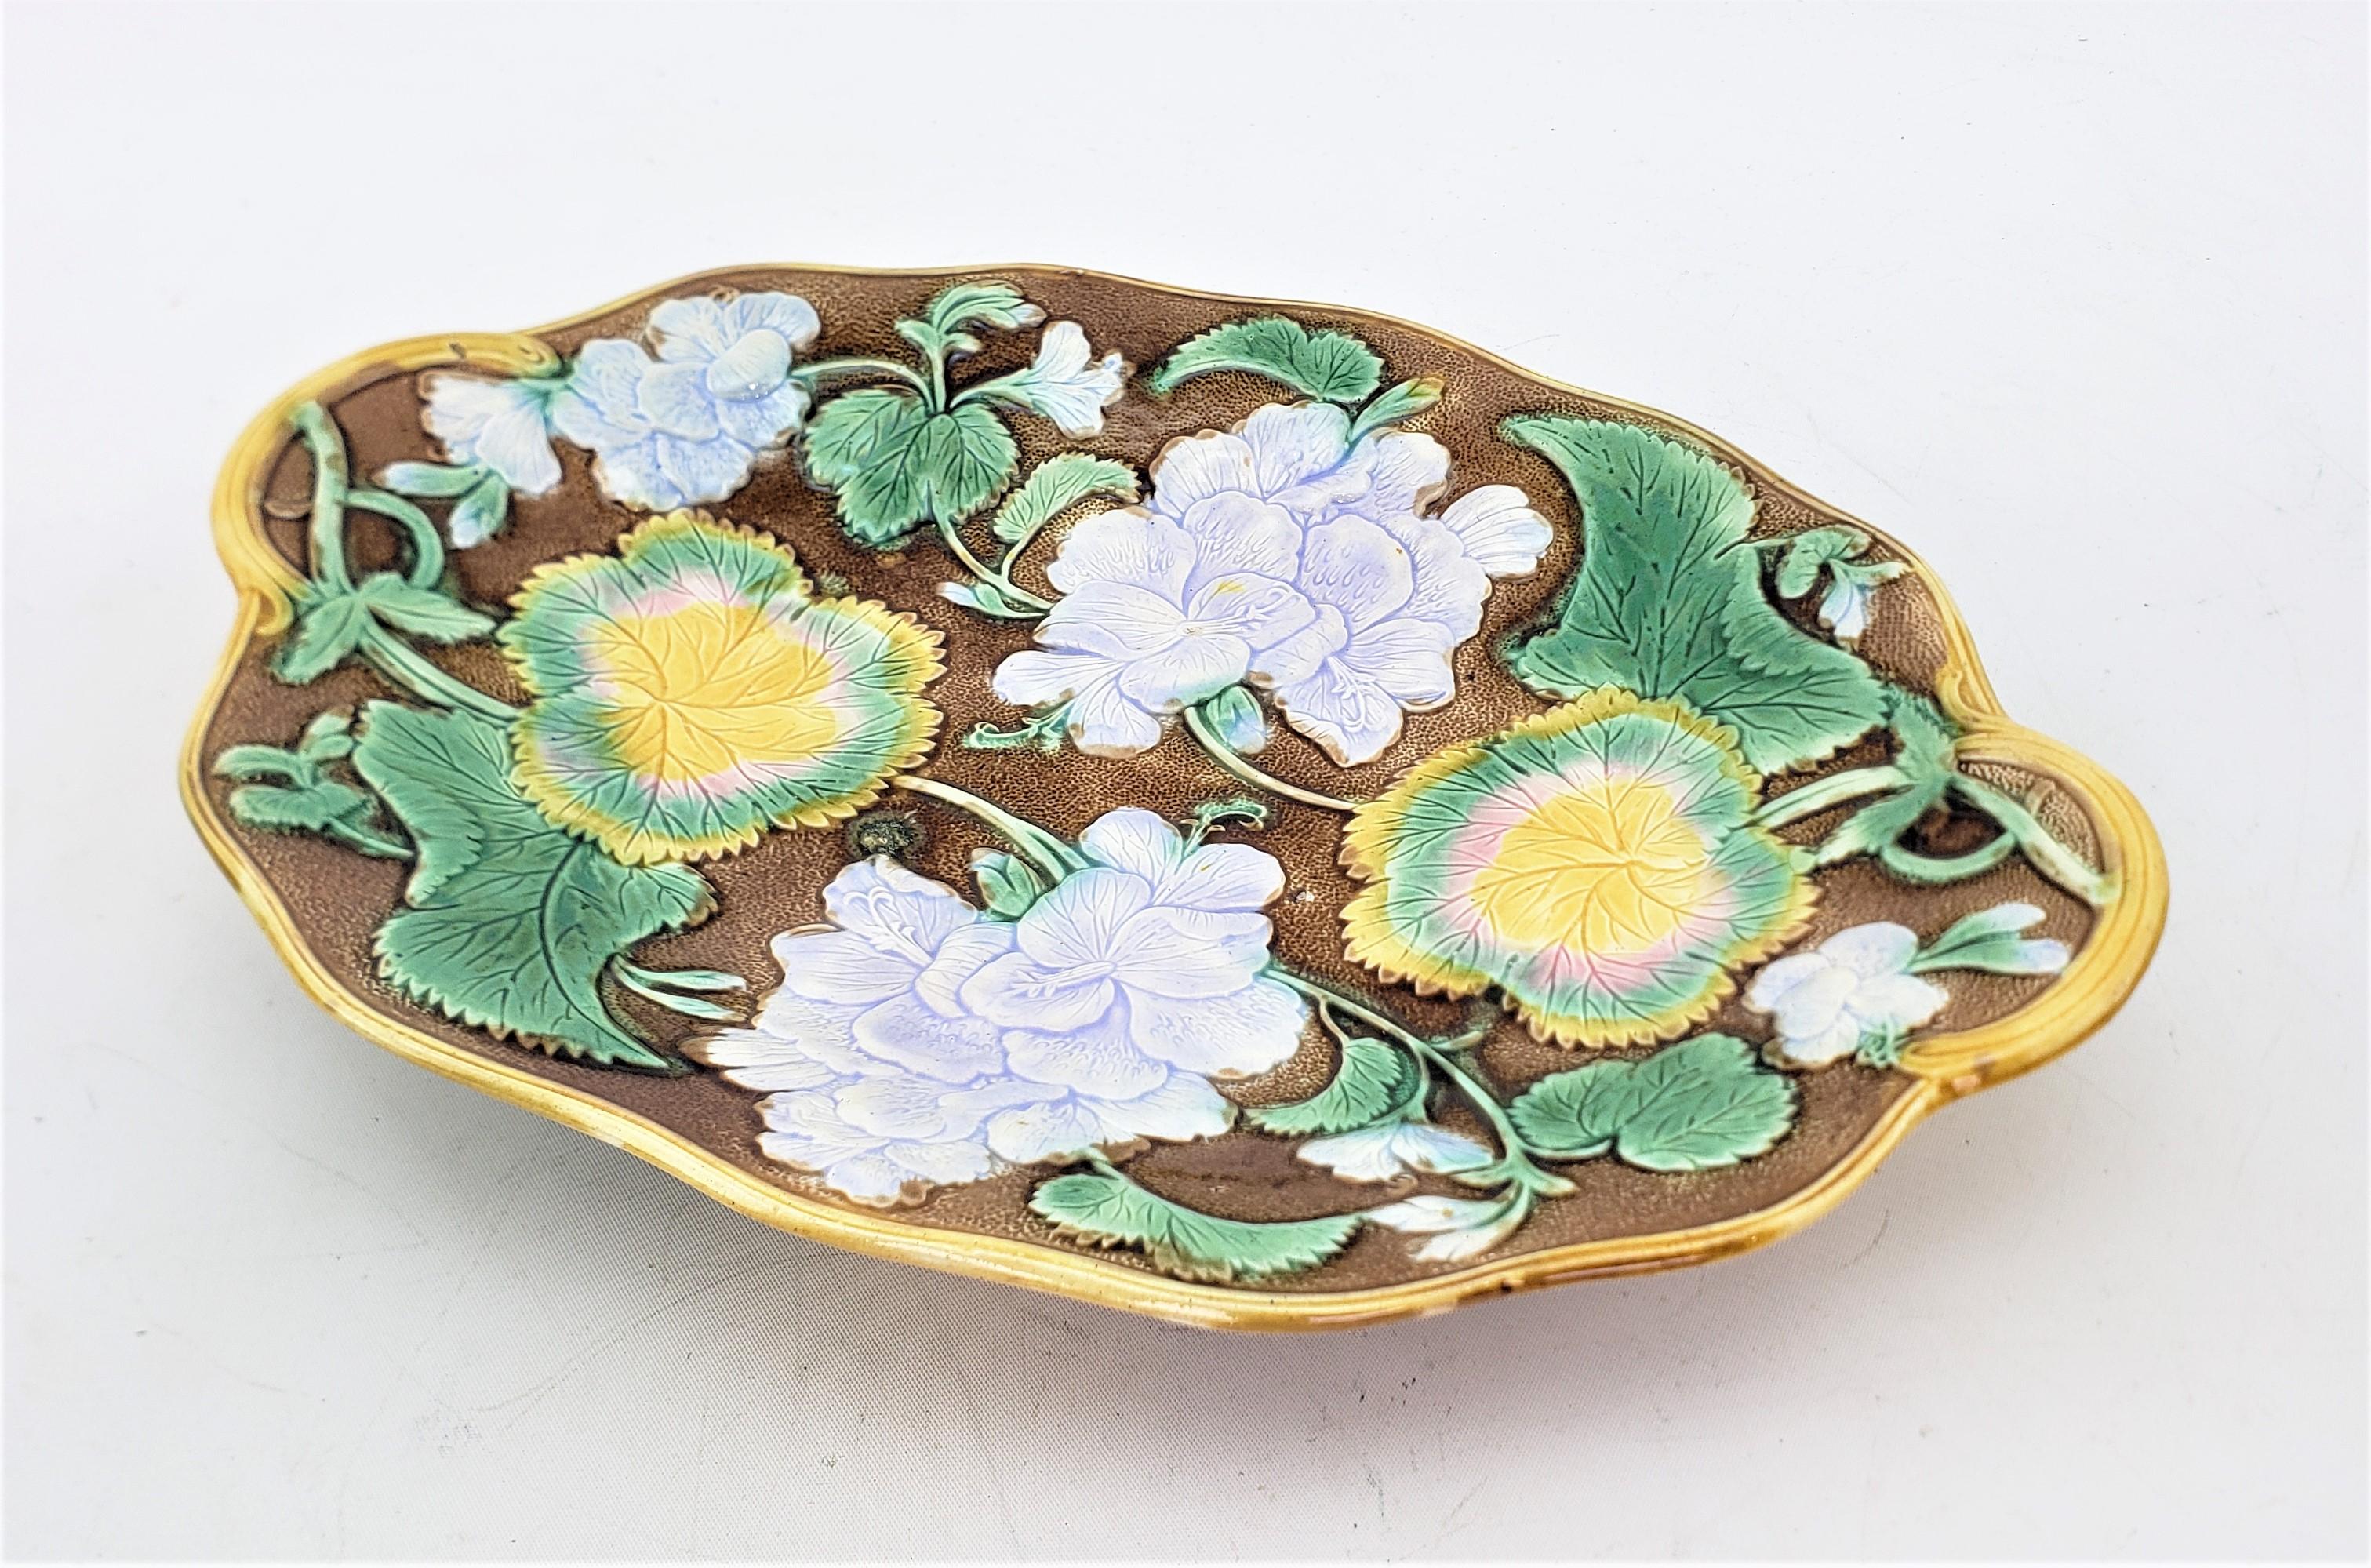 This small antique platter or server is unsigned, but presumed to have originated from England and date to approximately 1880 and done in the period Victorian style. The server is composed of majolica and is done in a variety of green, brown, gold,